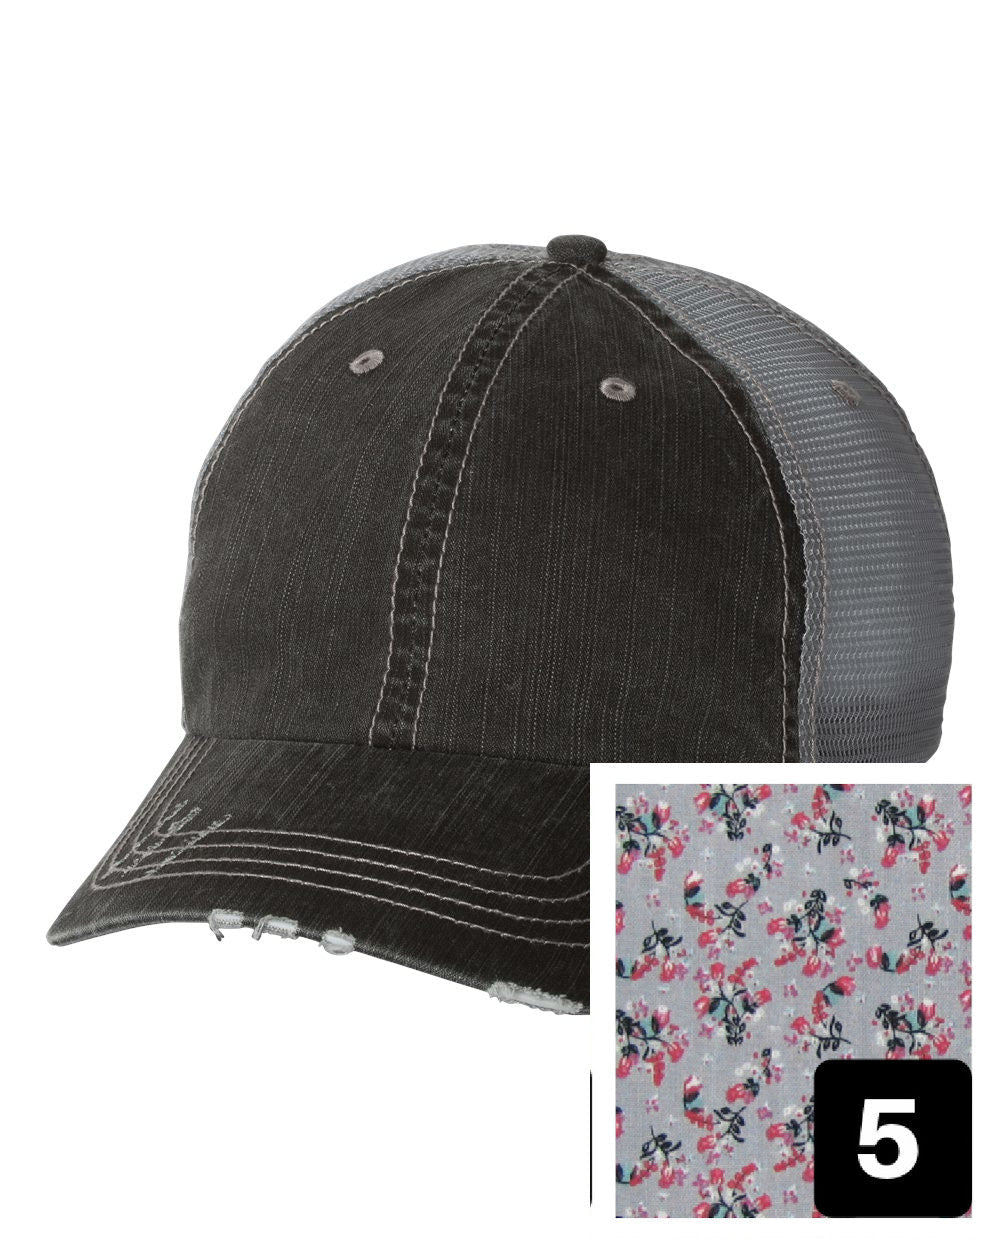 gray distressed trucker hat with purple and pink floral fabric state of North Carolina